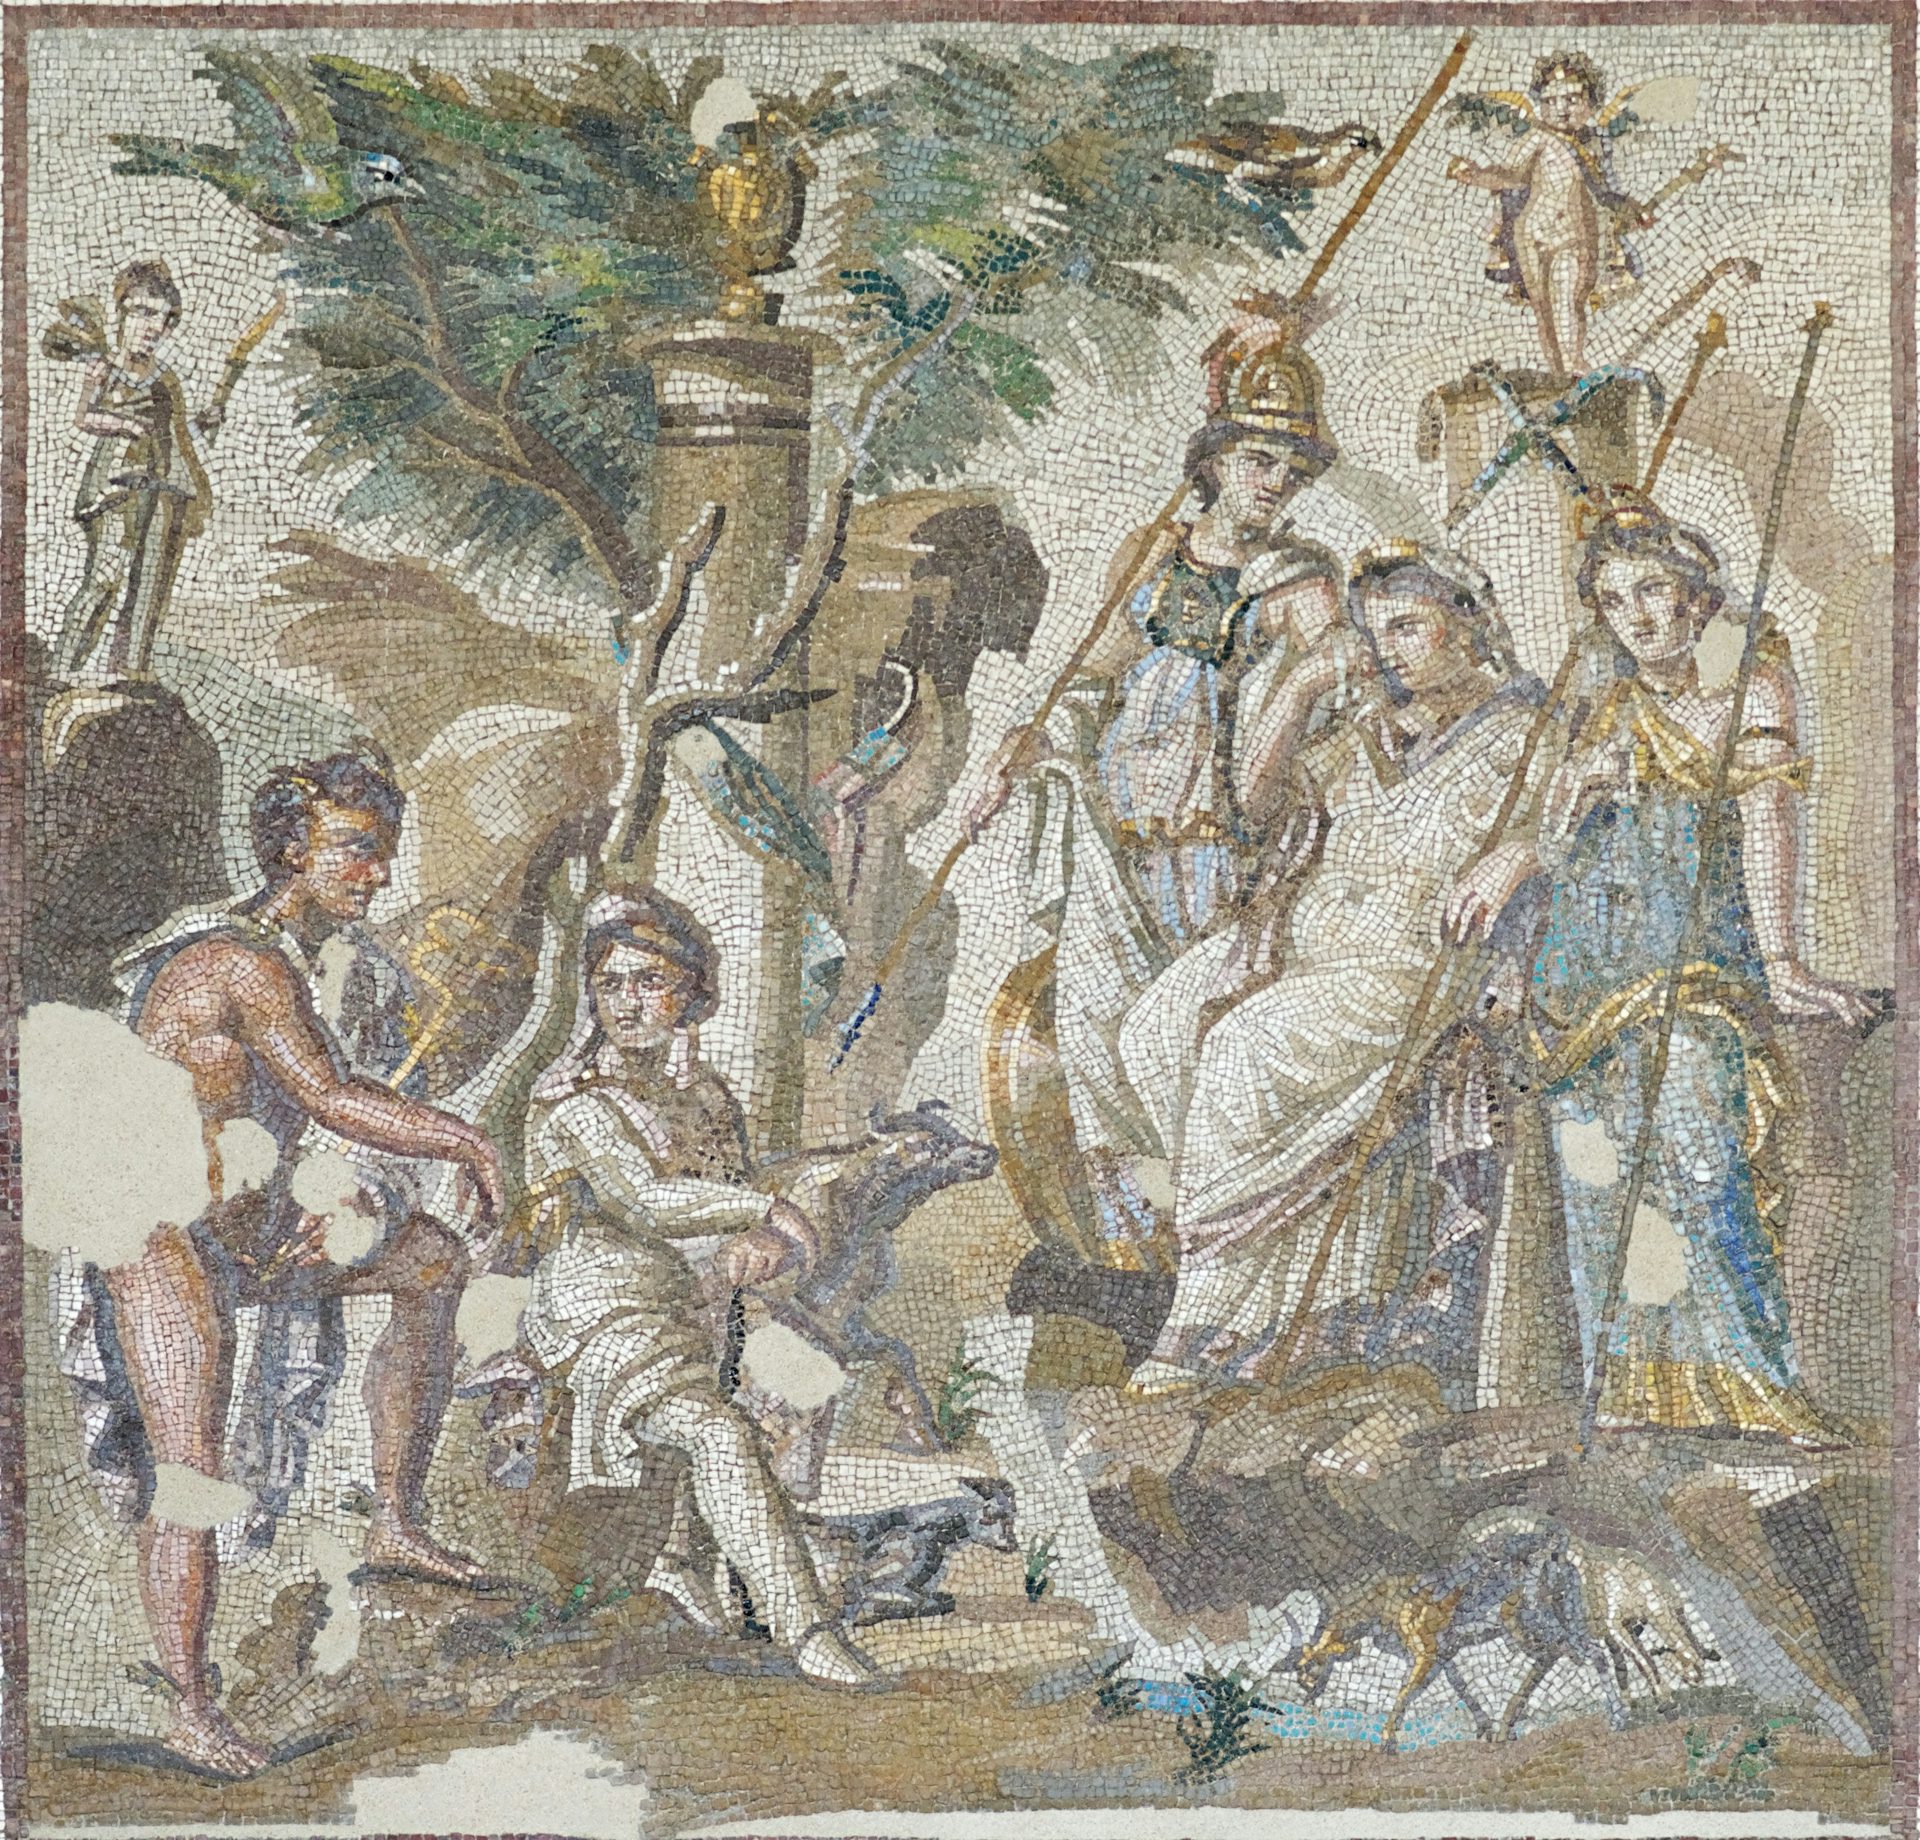 Mosaic of the Judgment of Paris